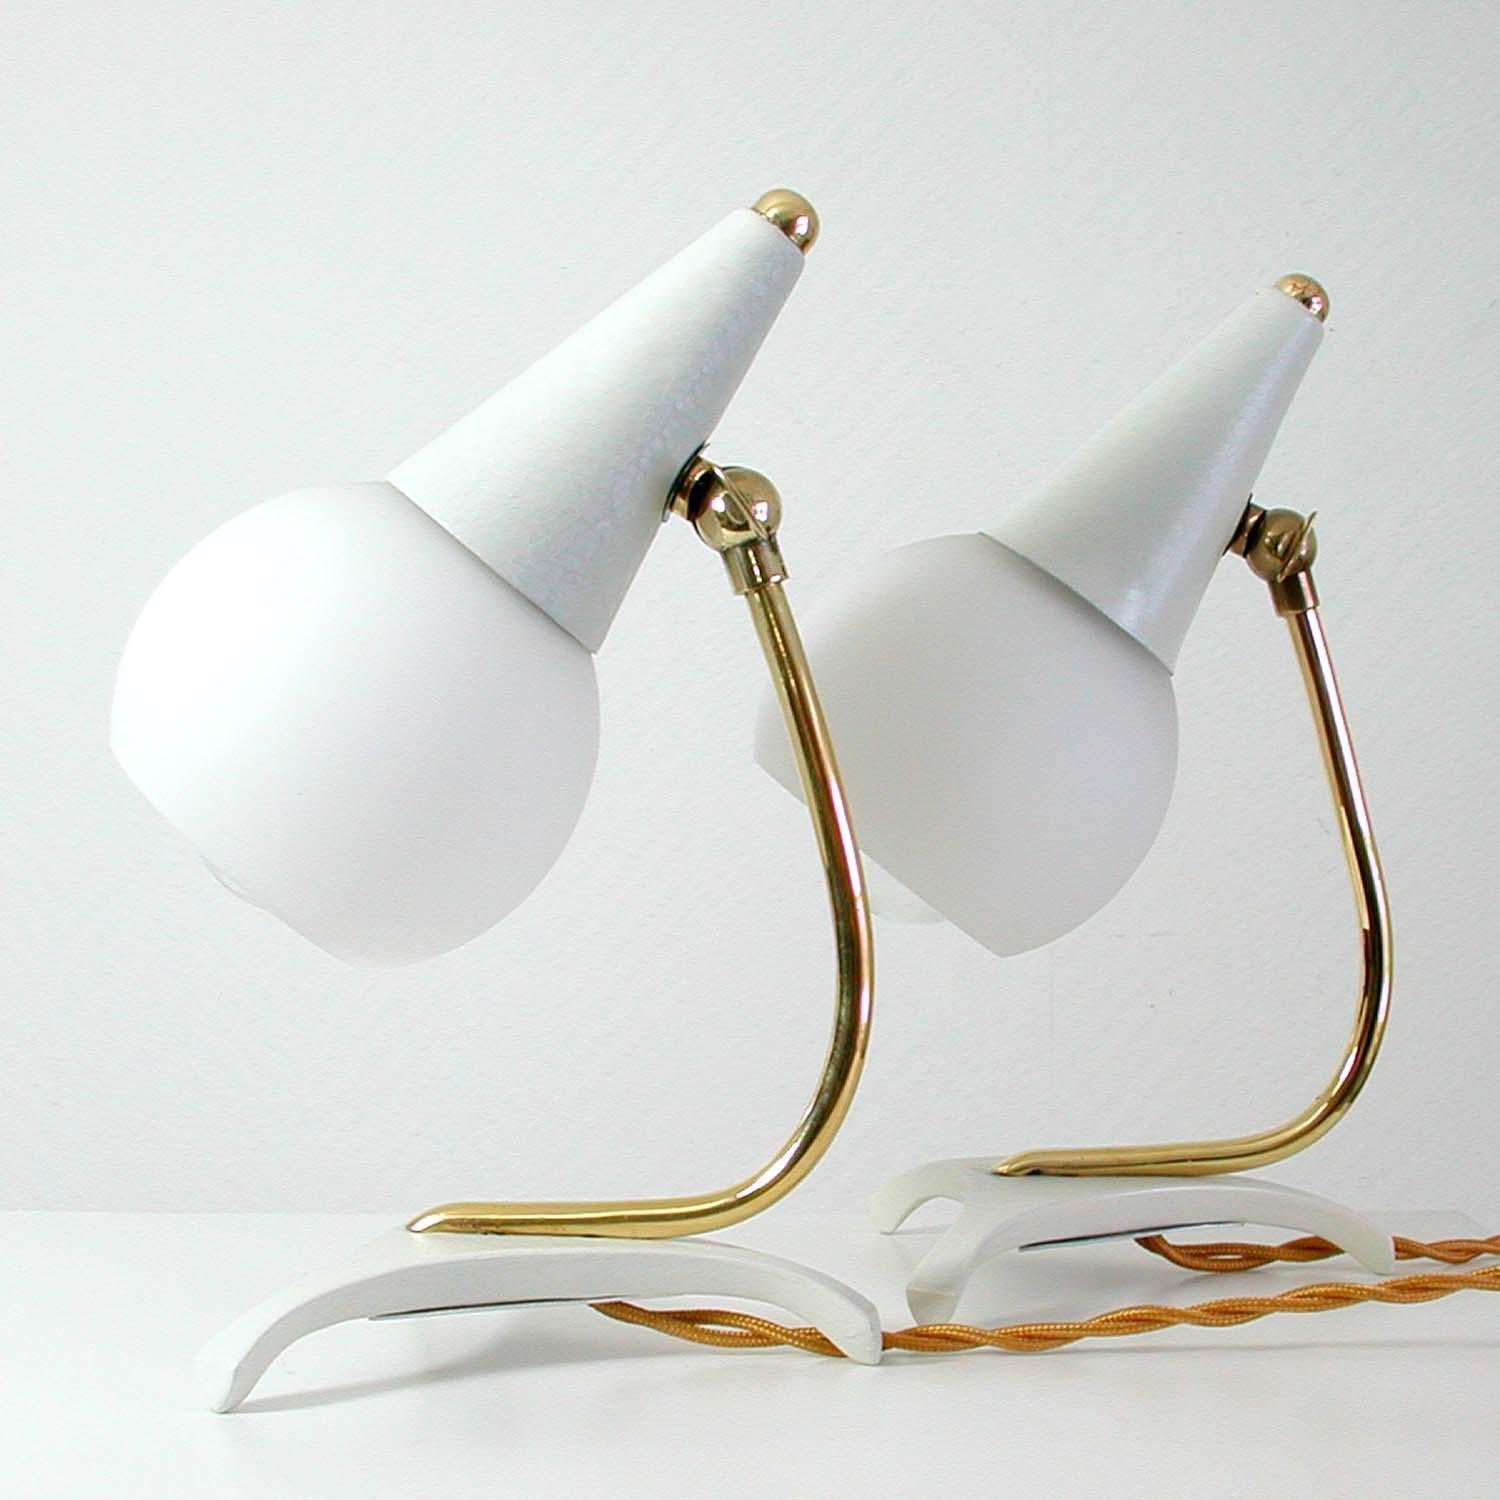 This set of 2 table lamps was manufactured in Italy in the 1950s. 

The lamps are made of white lacquered metal and brass and have got adjustable opaline glass globe lampshades.
The lamps have been polished, rewired and can be used in US, Europe